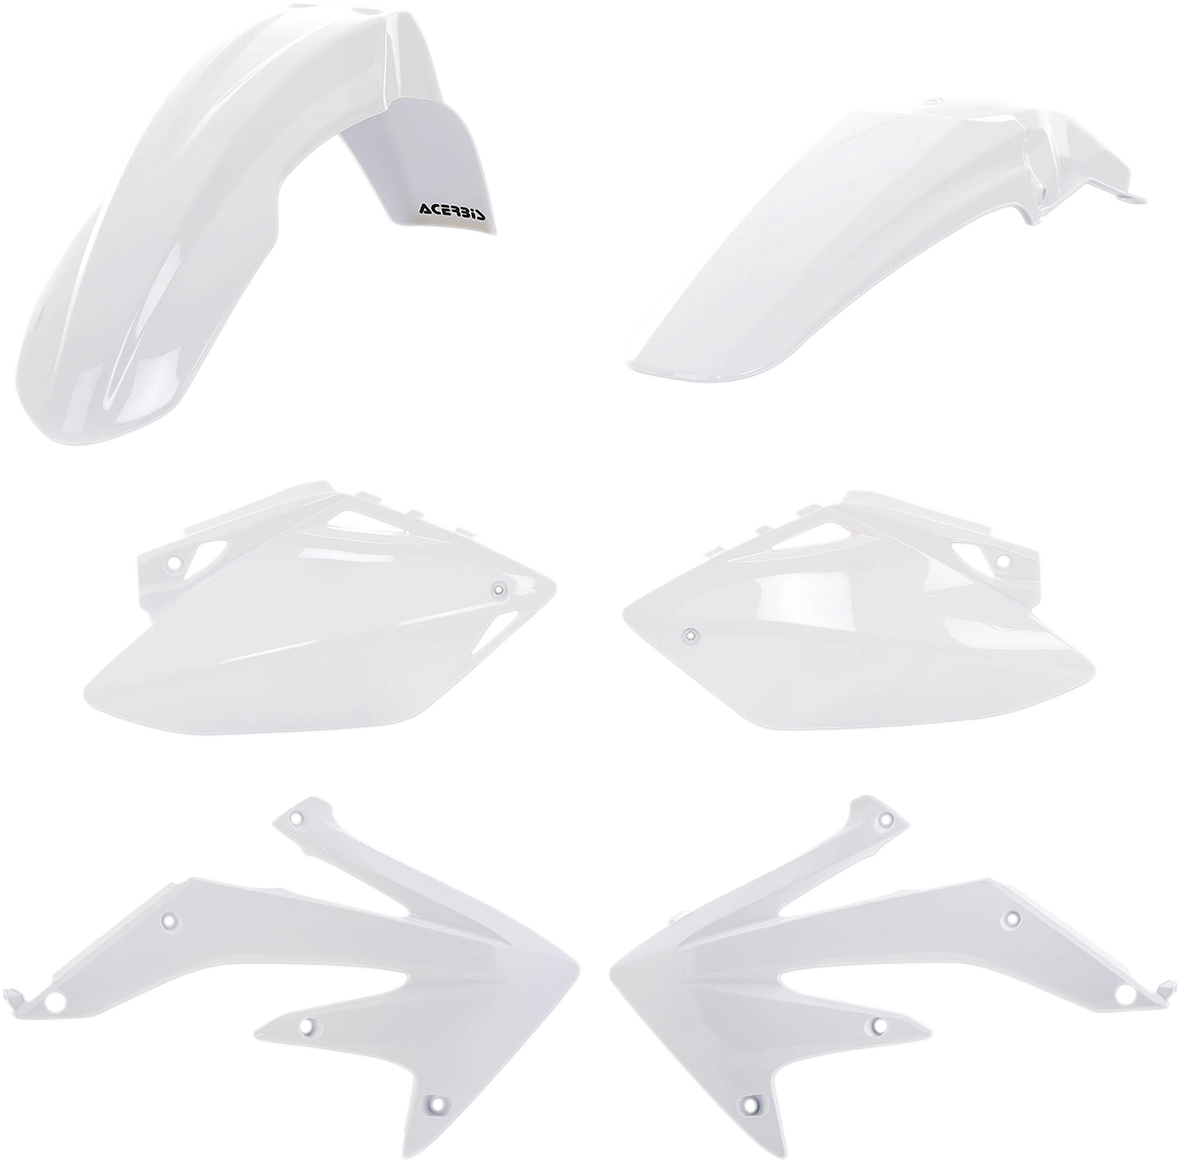 ACERBIS Standard Replacement Body Kit - White 2082050002